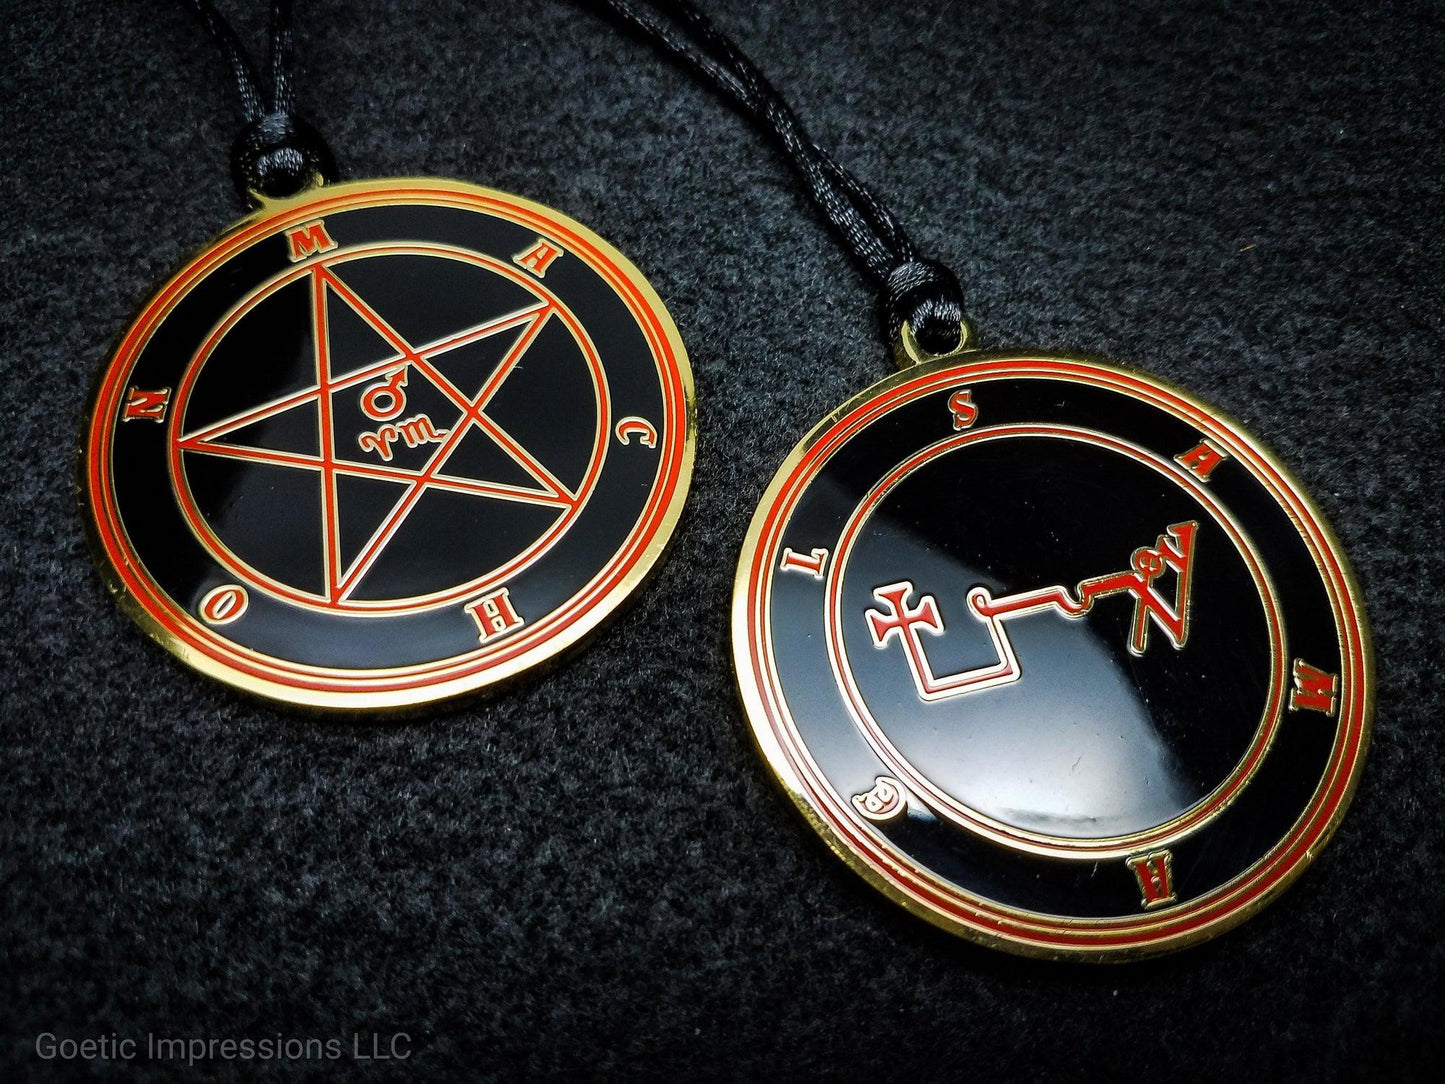 Heptameron Inspired Archangel Pendant featuring the seal and sigils of Archangel Samael.  Featuring on the reverse side of the talsiman, the Heaven Machon and astrological symbols of Mars, Aries and Scorpio based on Cornelius Agrippa